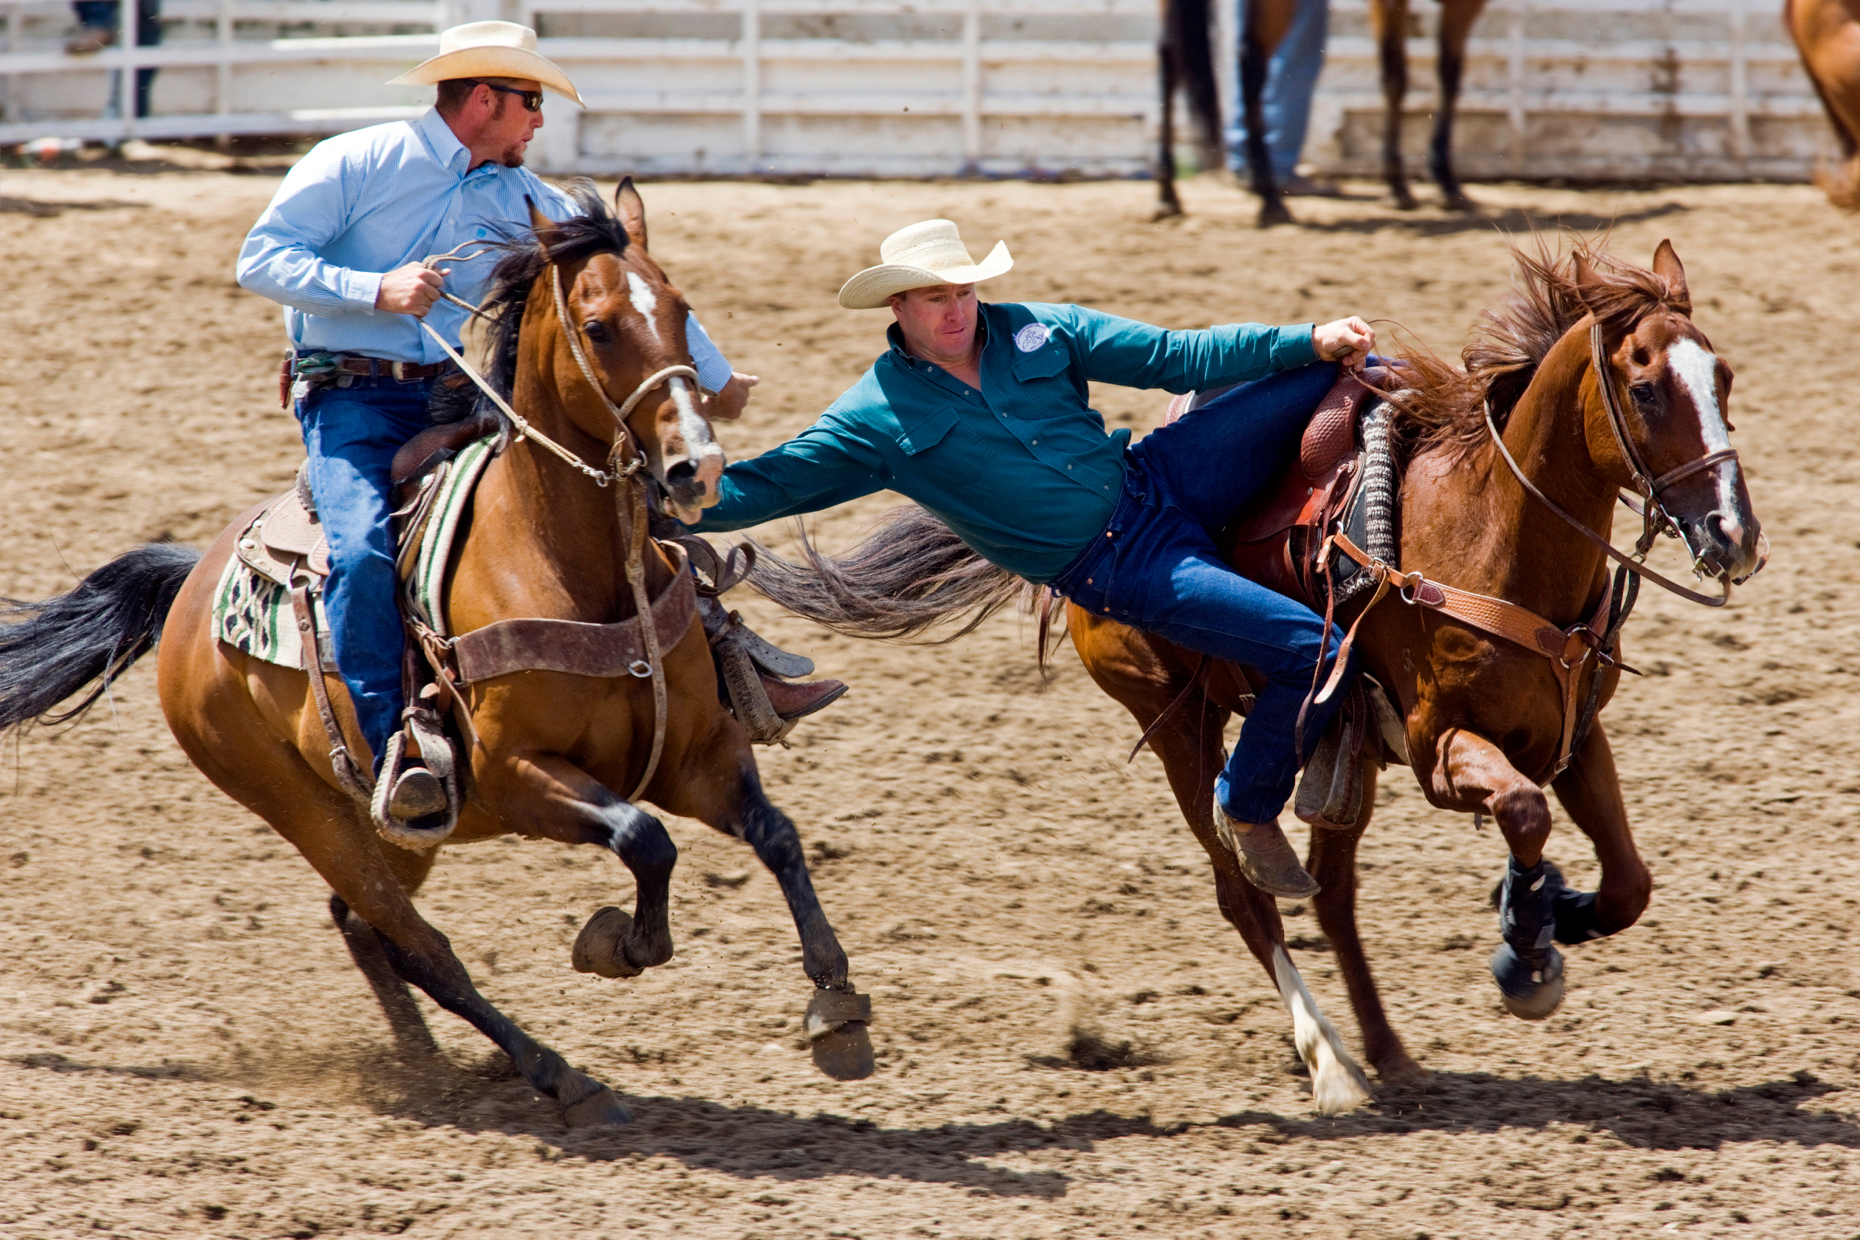 Cowboy riding in the steer wrestling event, Chaffee County Fair & Rodeo